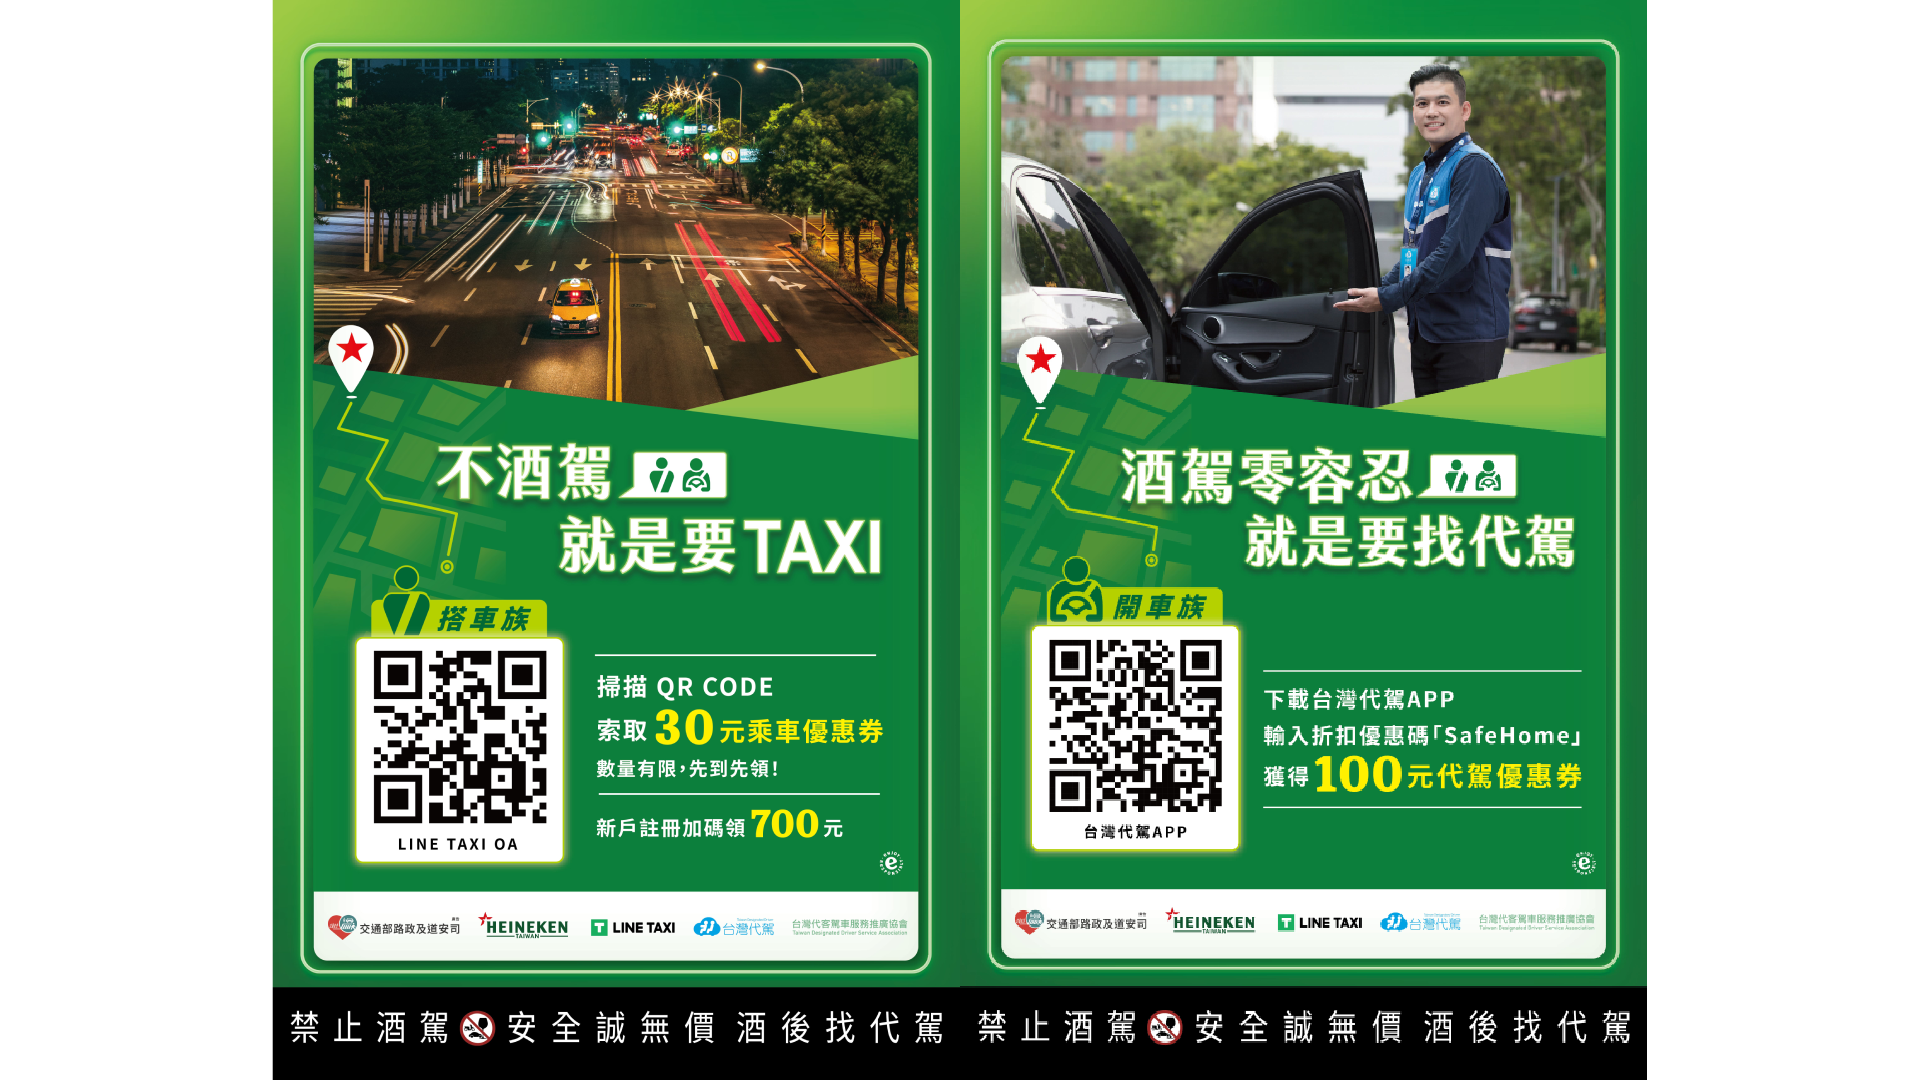 taxi poster